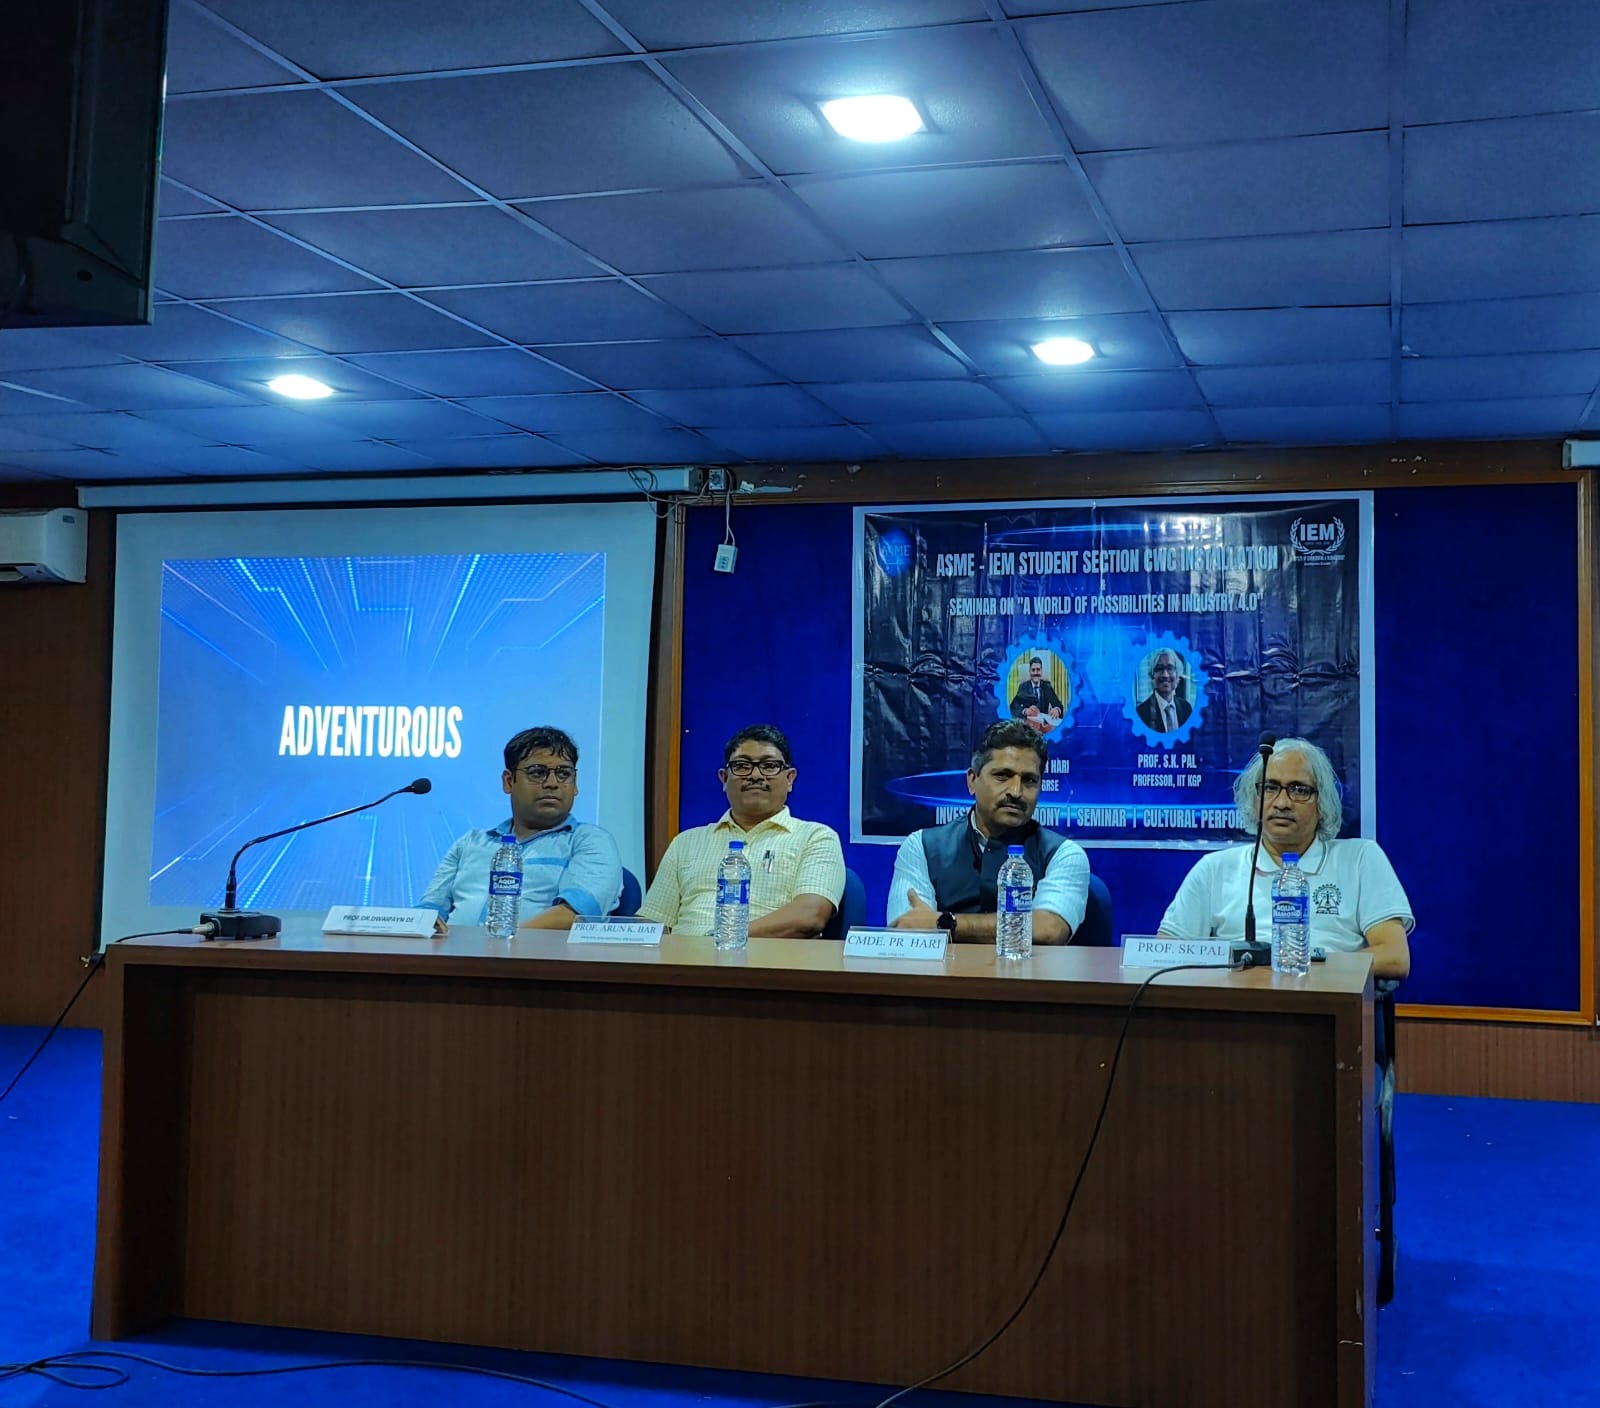 CMD, GRSE as the Chief Guest at a seminar organised by Institute of Engineering and Management, Kolkata on 28 Jul 23